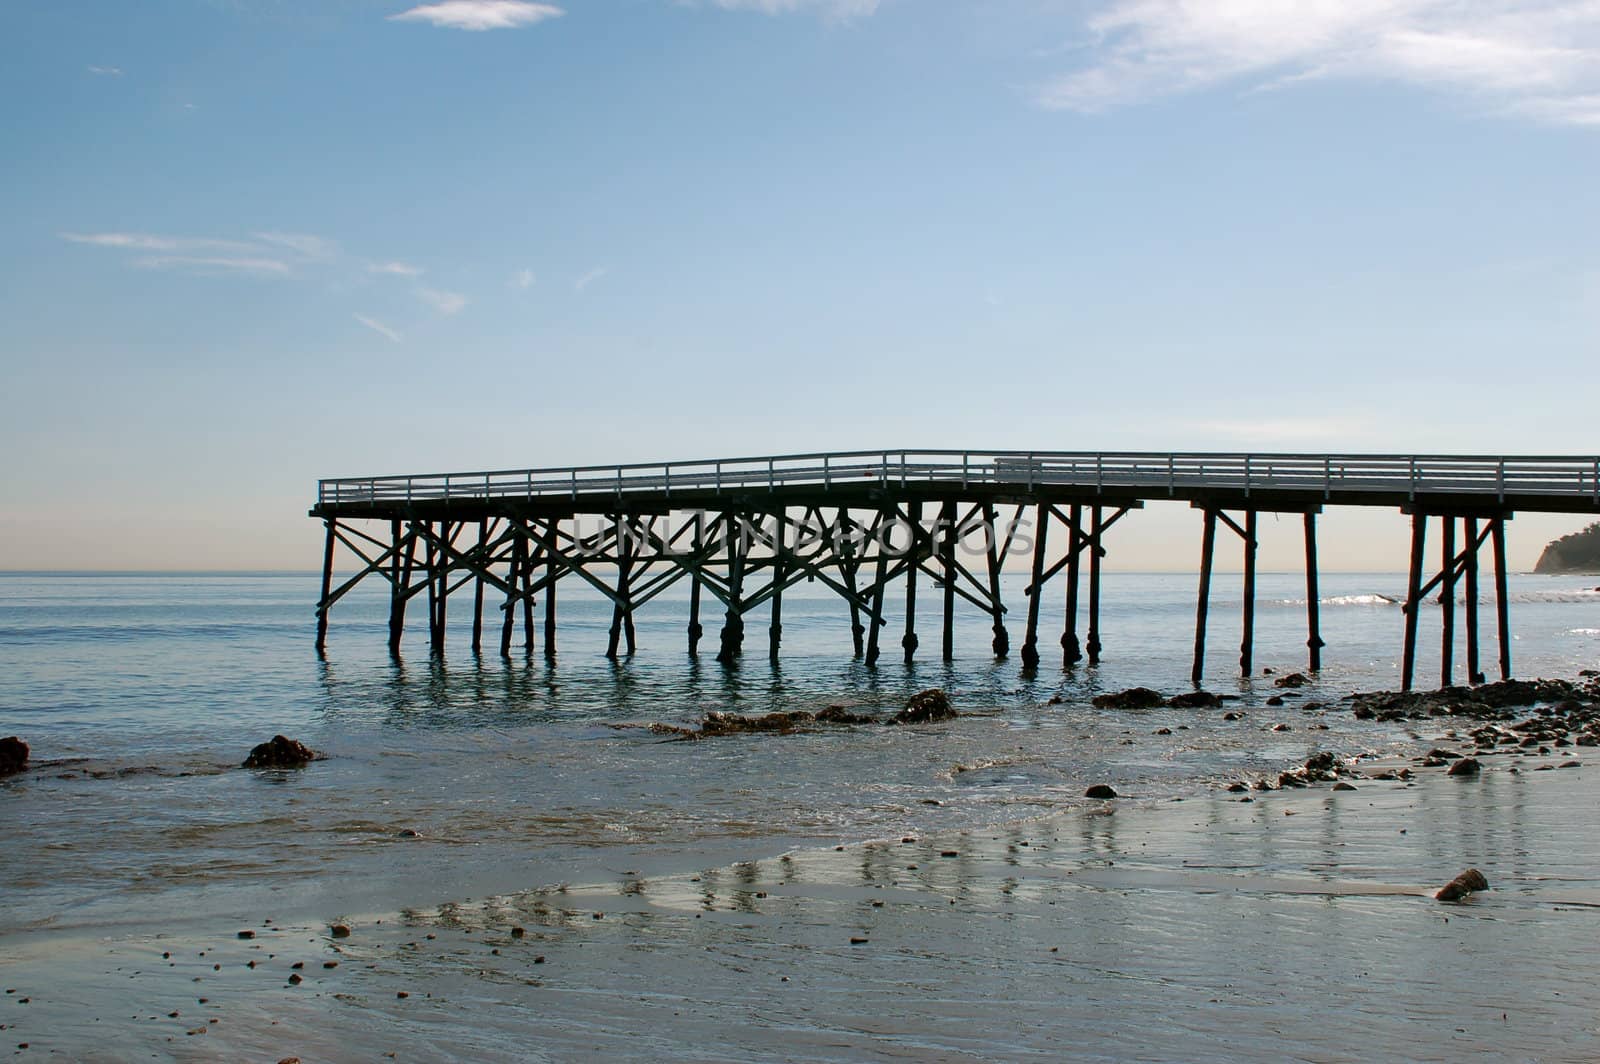 From right to left view of a rickety wooden pier/ jetty into the Pacific Ocean at Paradise Cove, California, with half sky, half sand with the pier/ jetty in the middle of the shot